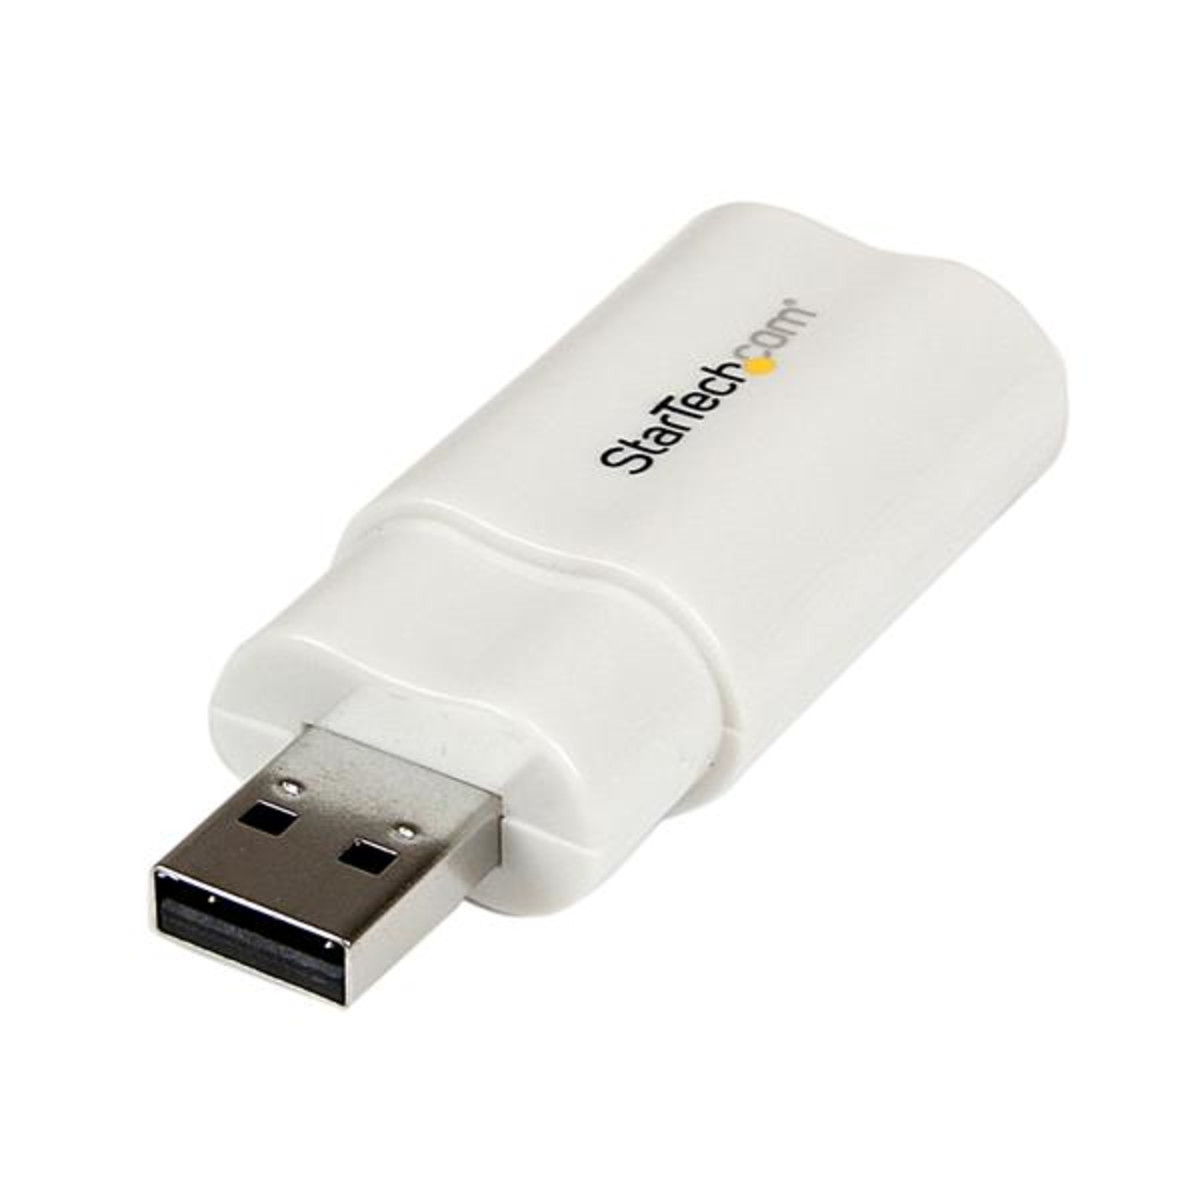 USB to Stereo Audio Adapter Converter